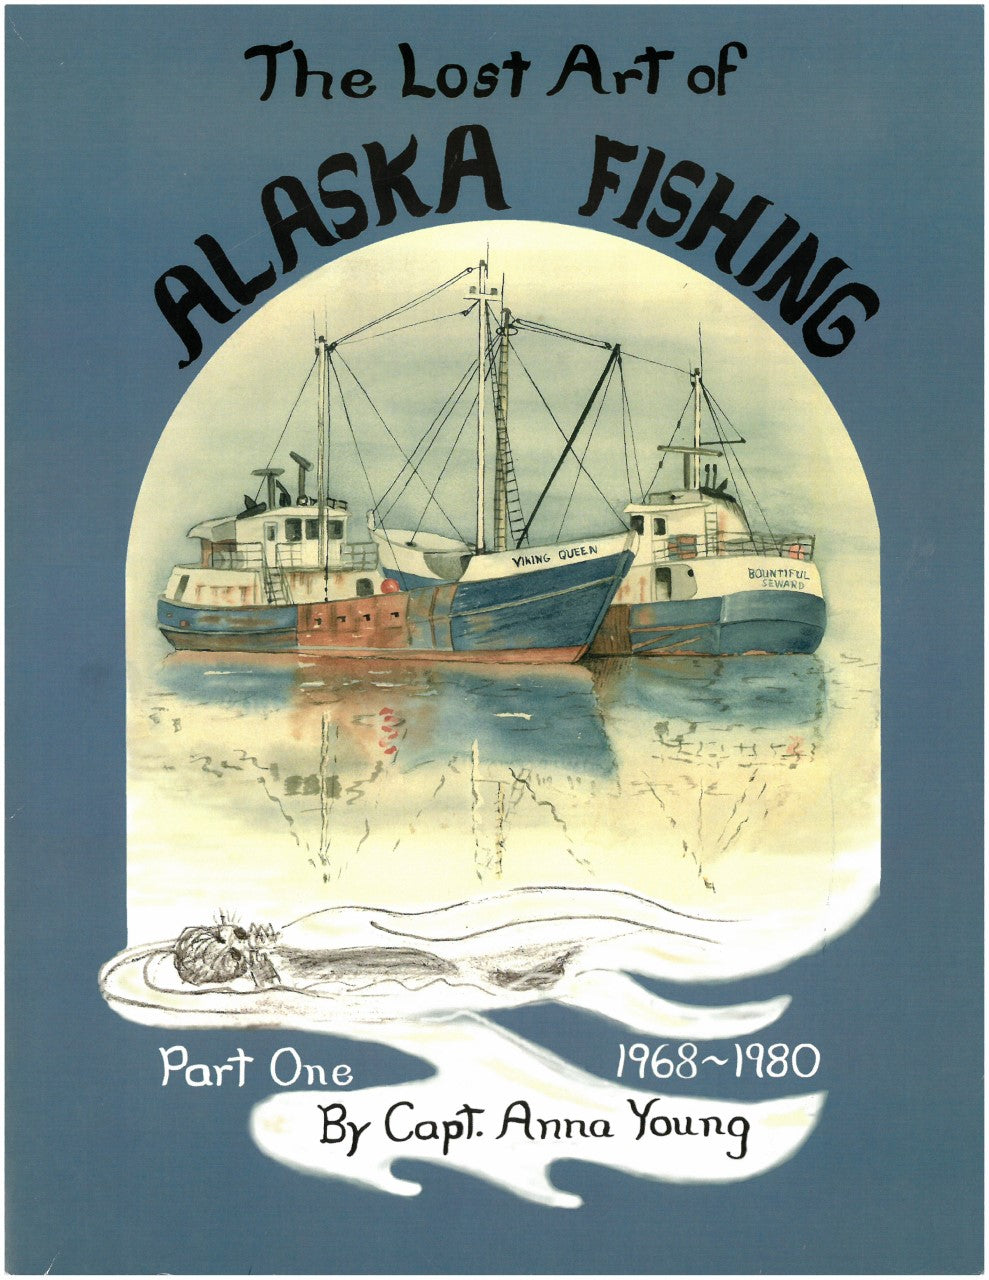 The Lost Art of Alaska Fishing by Anna Young